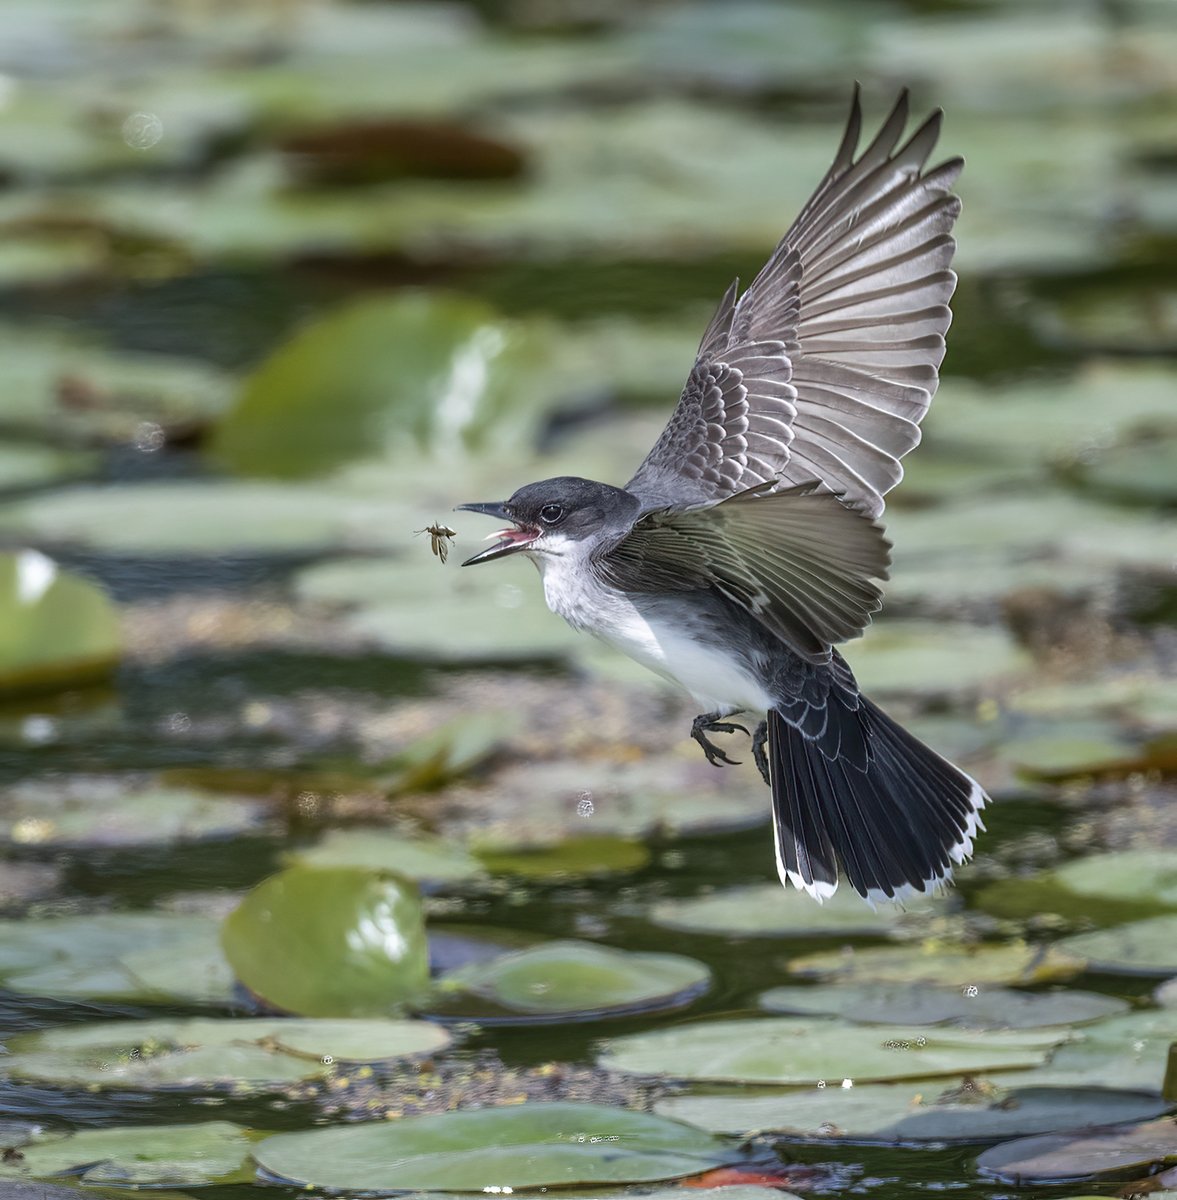 An Eastern Kingbird about to enjoy a little buggy snack